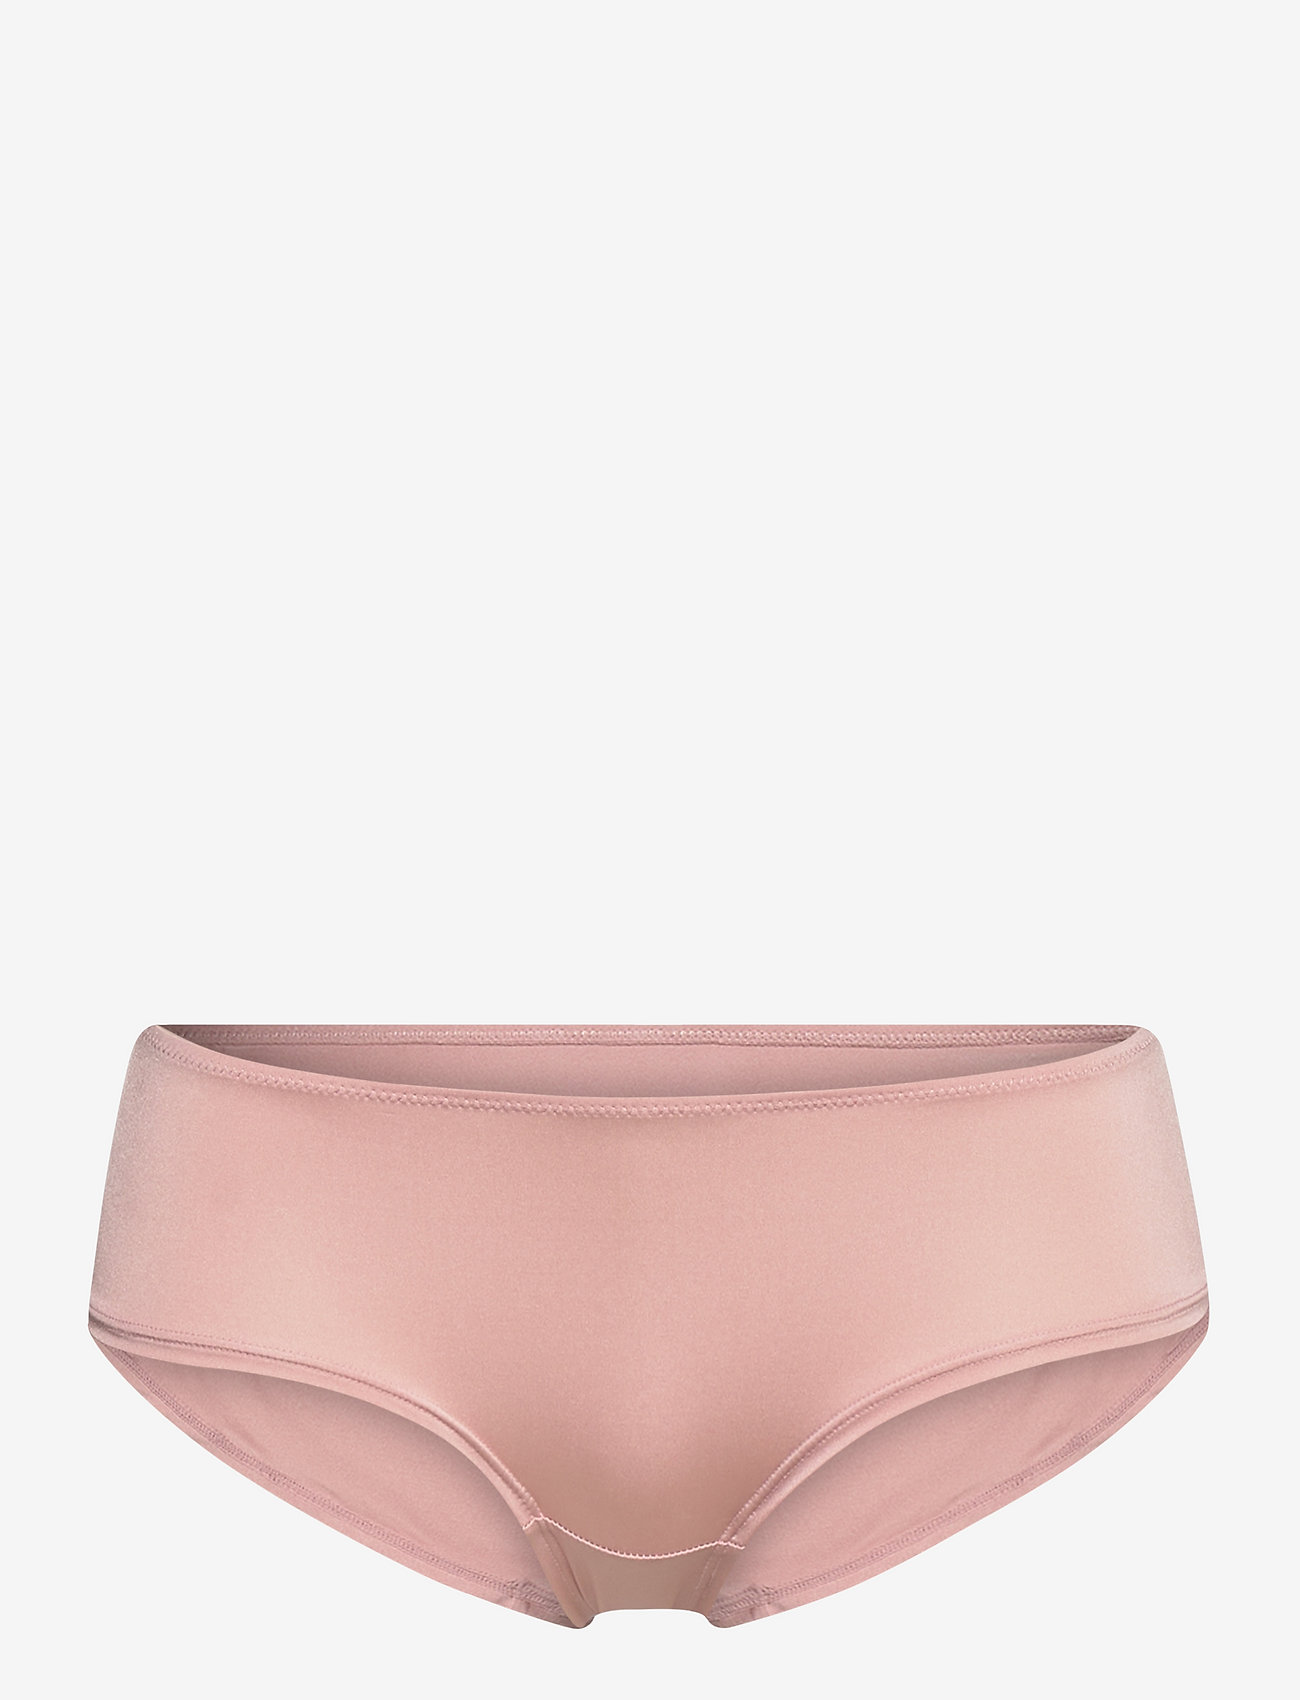 Esprit Bodywear Women - Recycled: microfibre hipster shorts - culottes et slips - old pink - 0